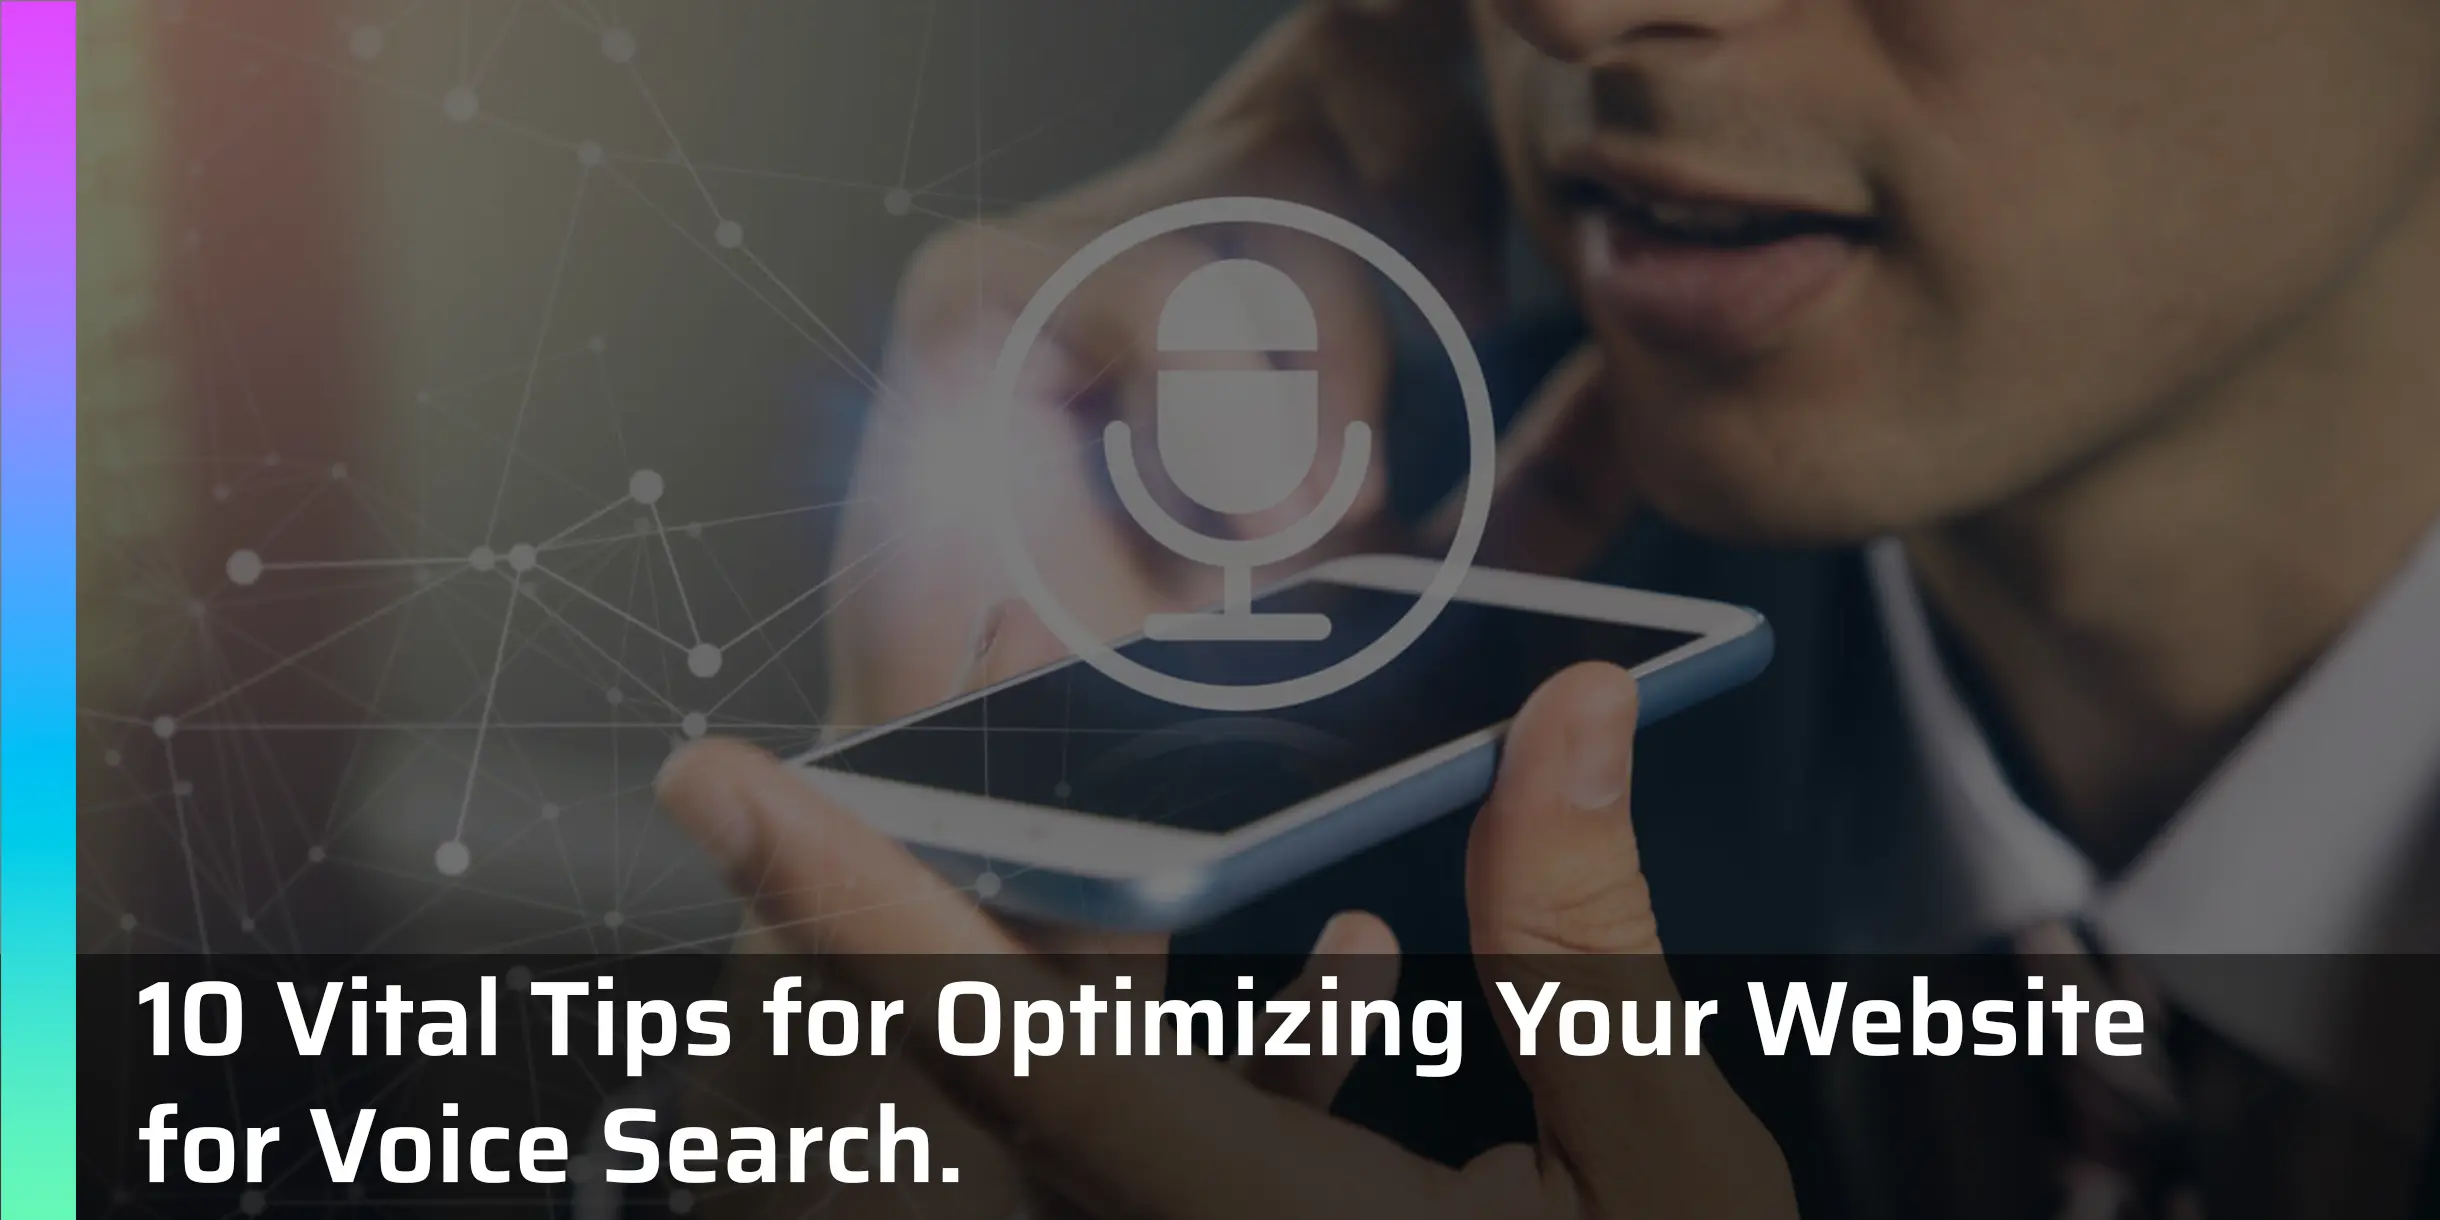 How to Optimize Your Website for Voice Search 10 Essential Tips